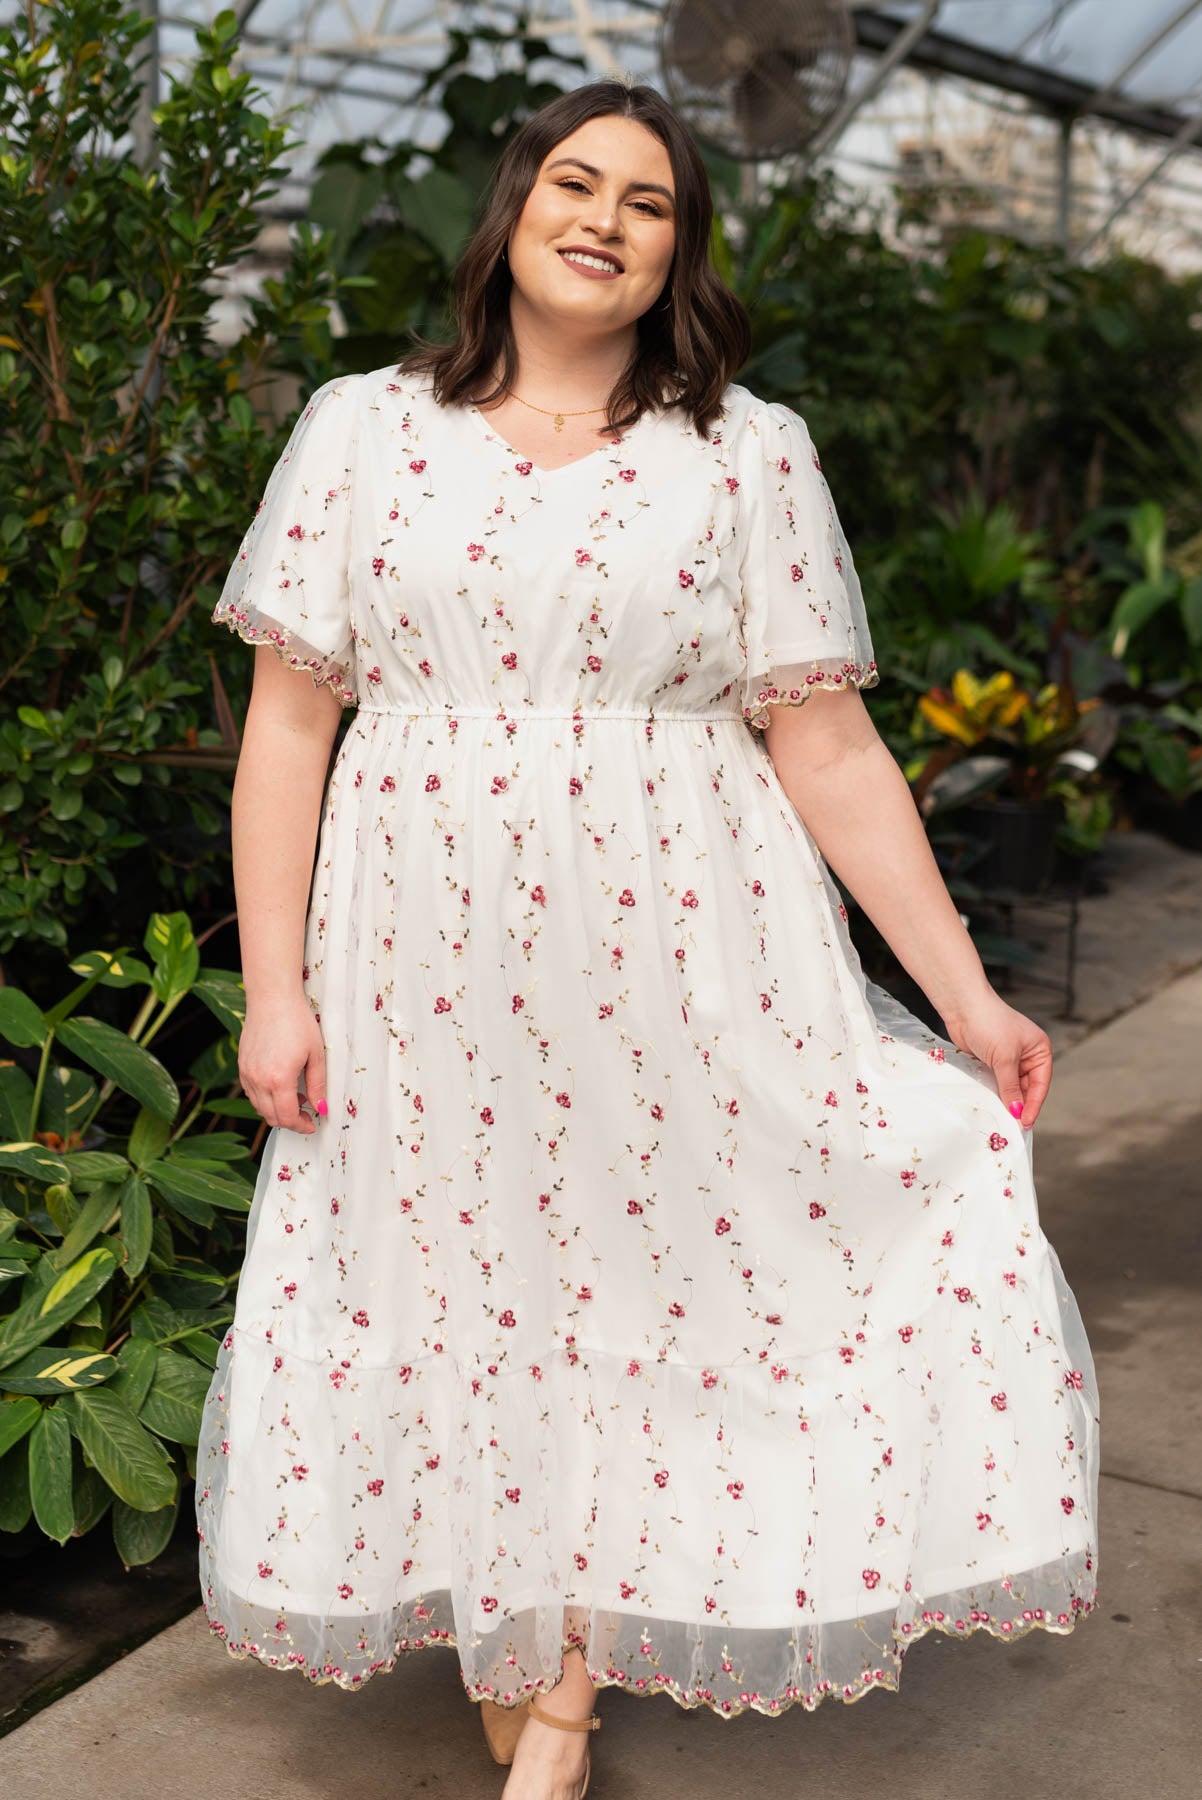 Short sleeve plus size ivory embroidered floral dress with elastic waist